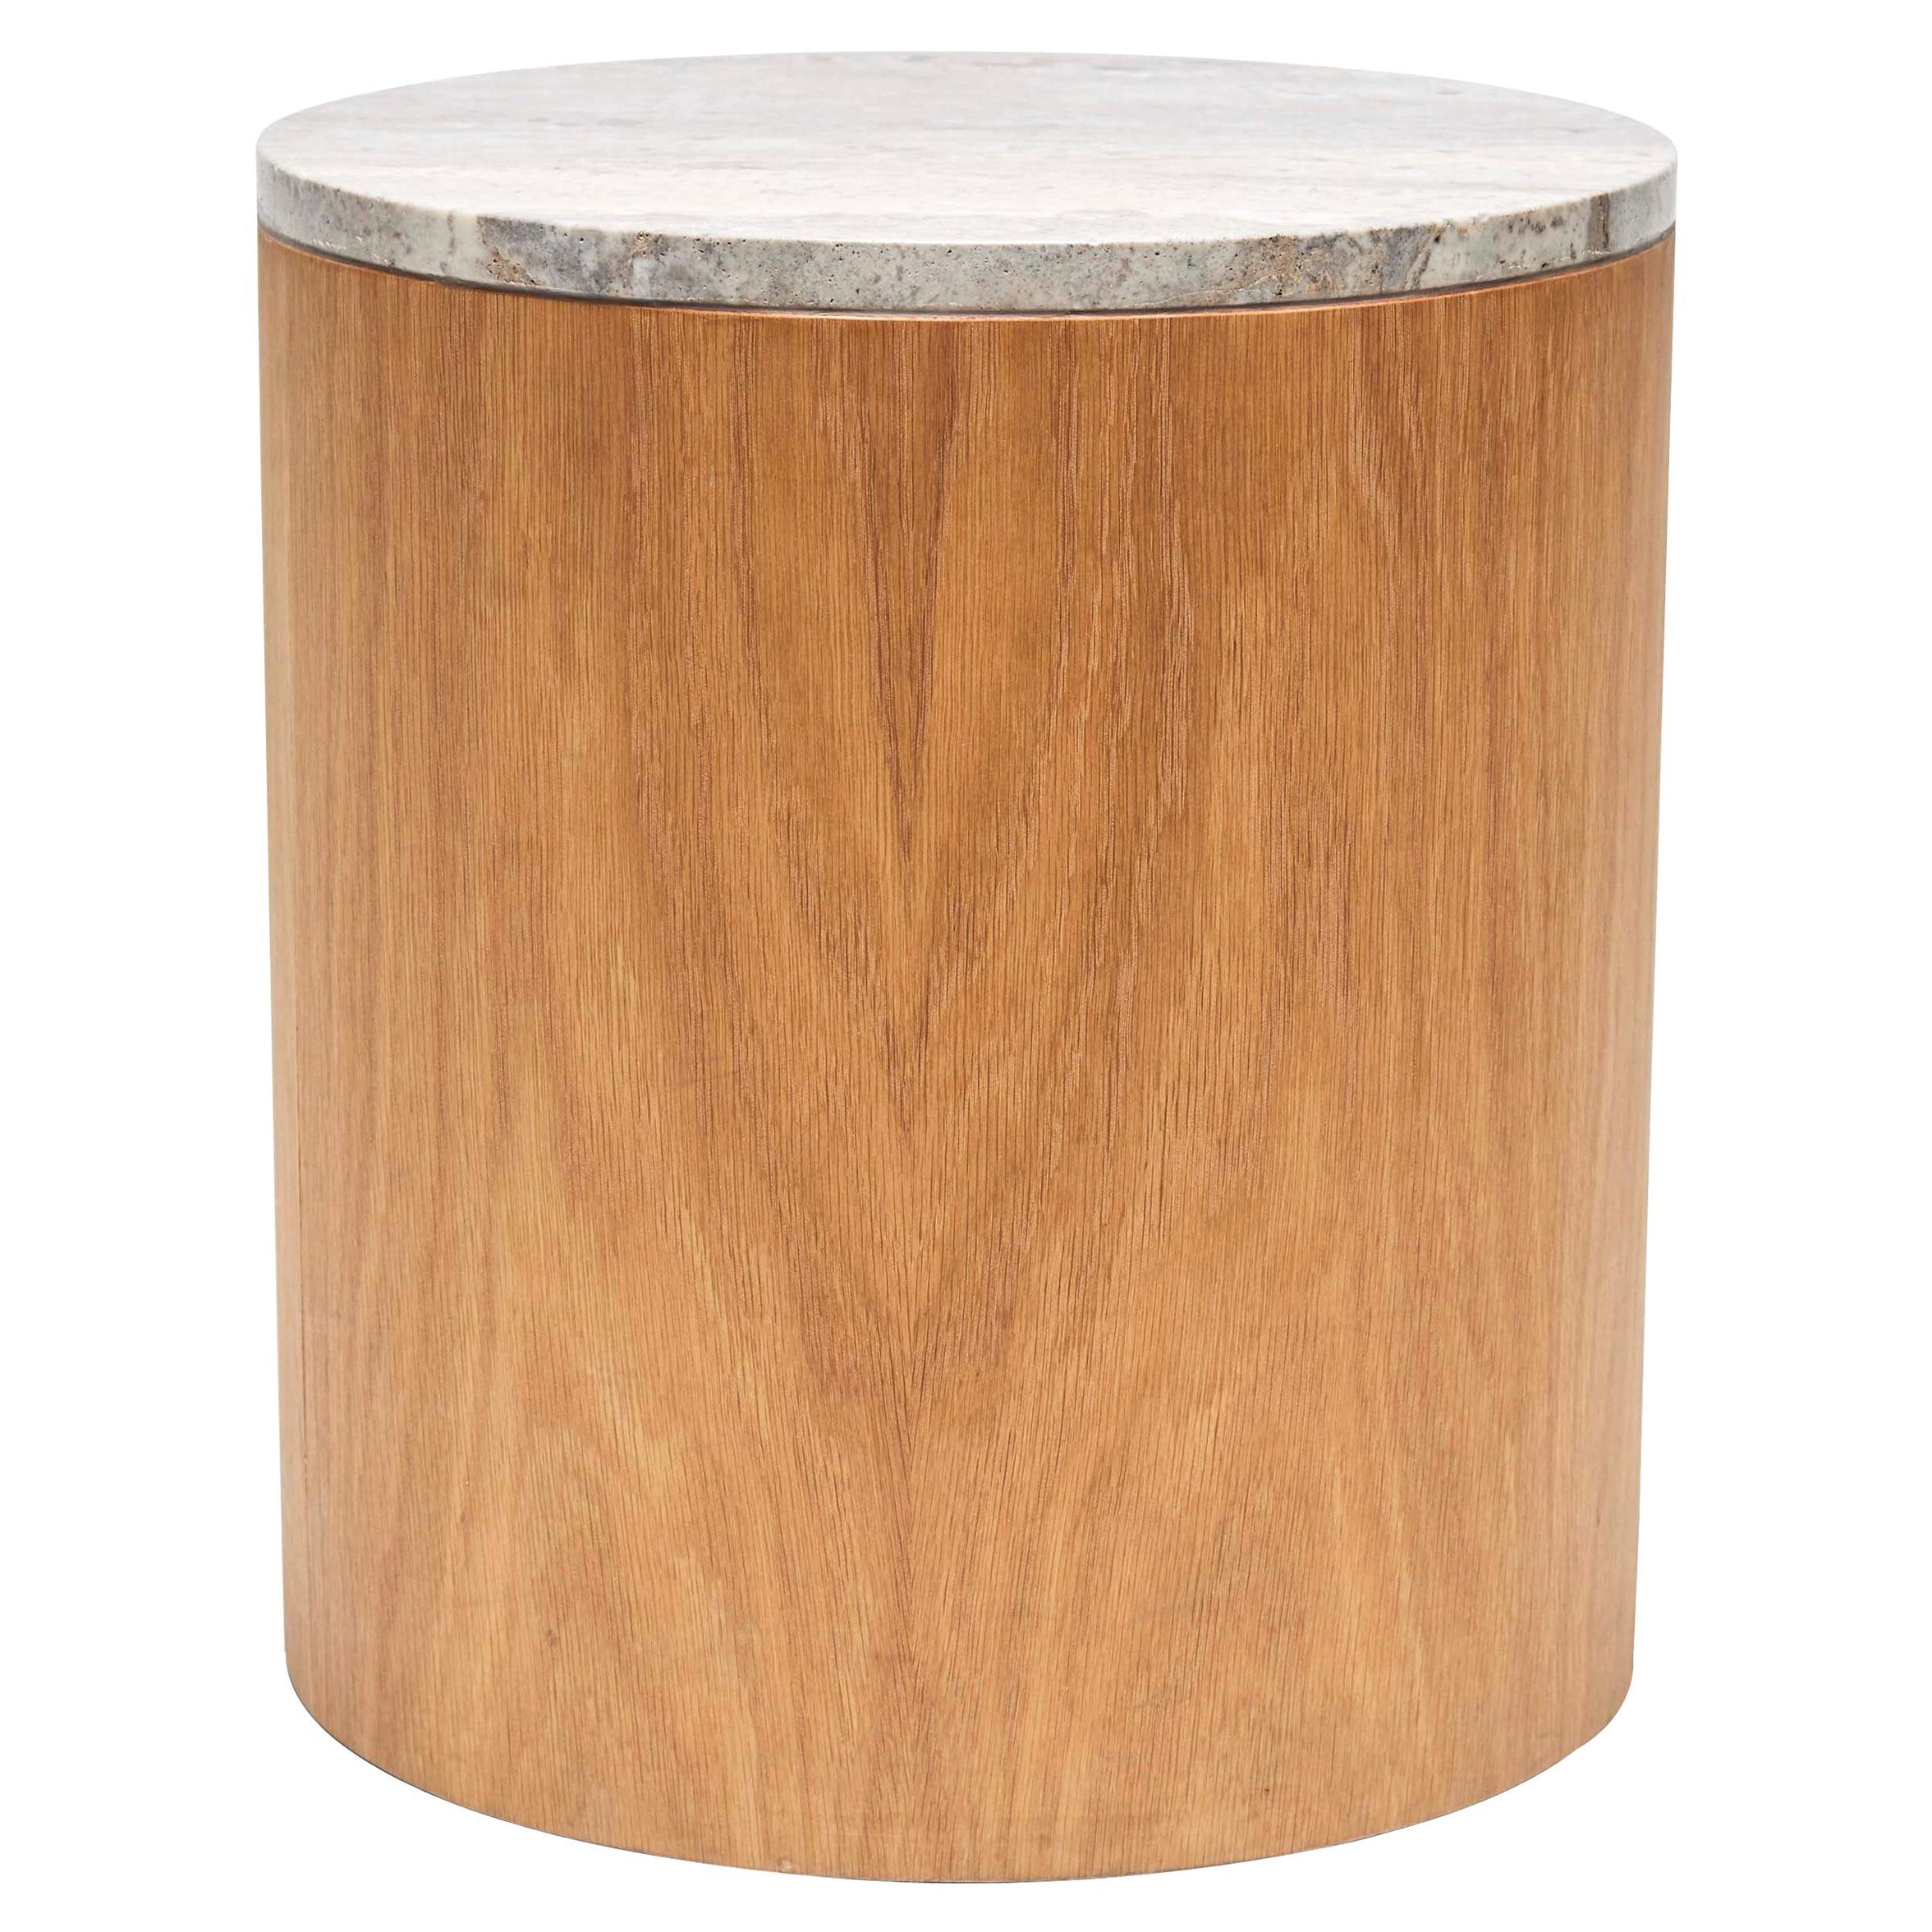 Prospect Side Table with Stone Top by Lawson-Fenning